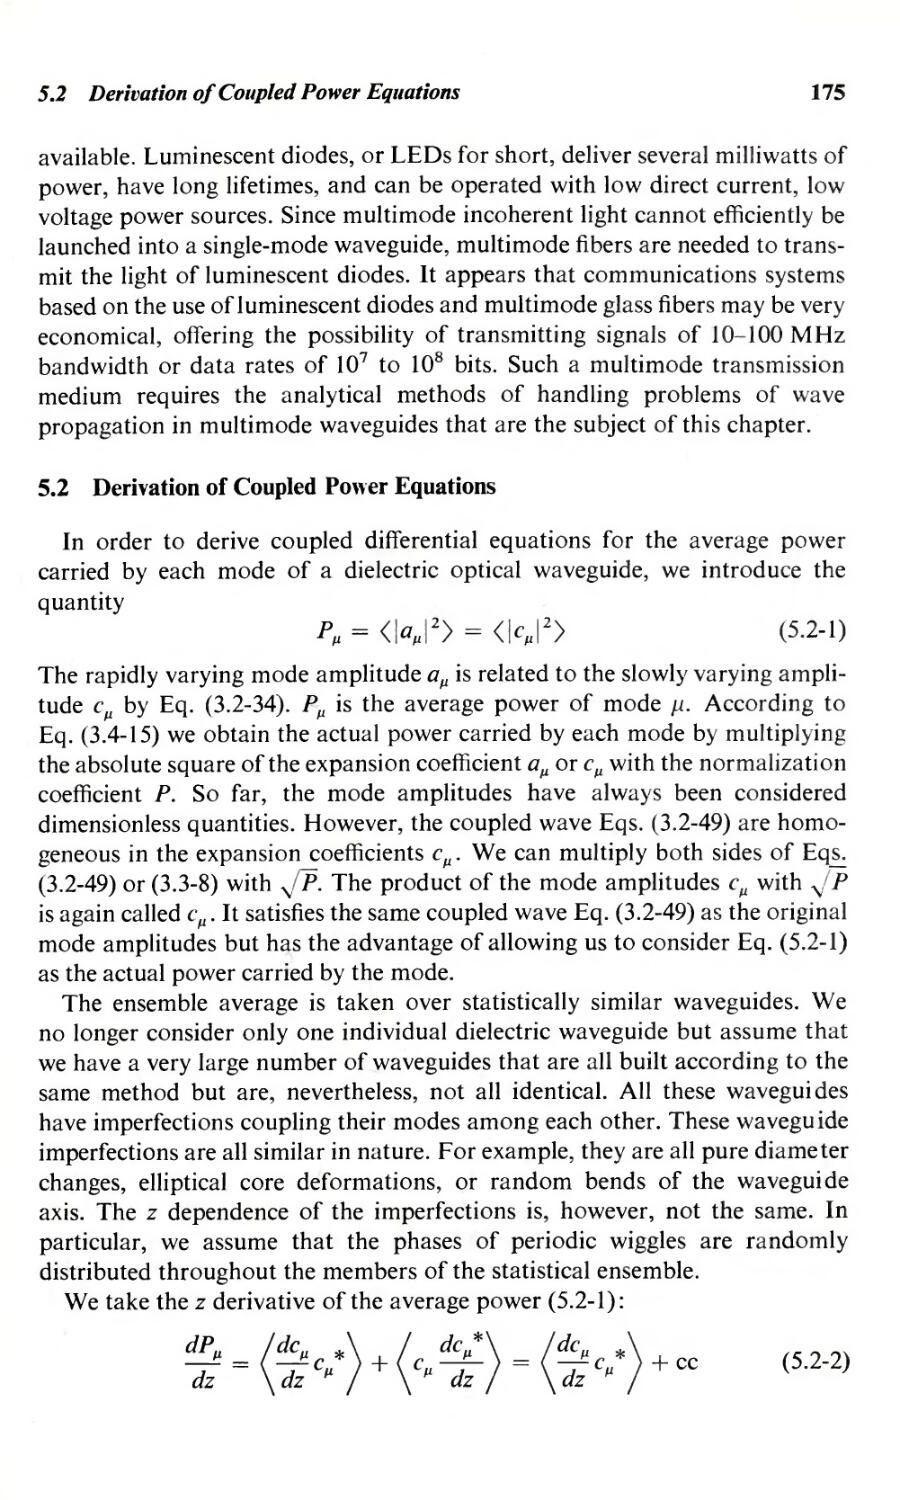 5.2 Derivation of Coupled Power Equations 175
Communication system, 175
--- derivation of, 175
Ensemble, 175
--- multimode, 175
Incoherent light, 175
Luminescent diode, 175
Multimode fiber, 175
Statistical ensemble, 175